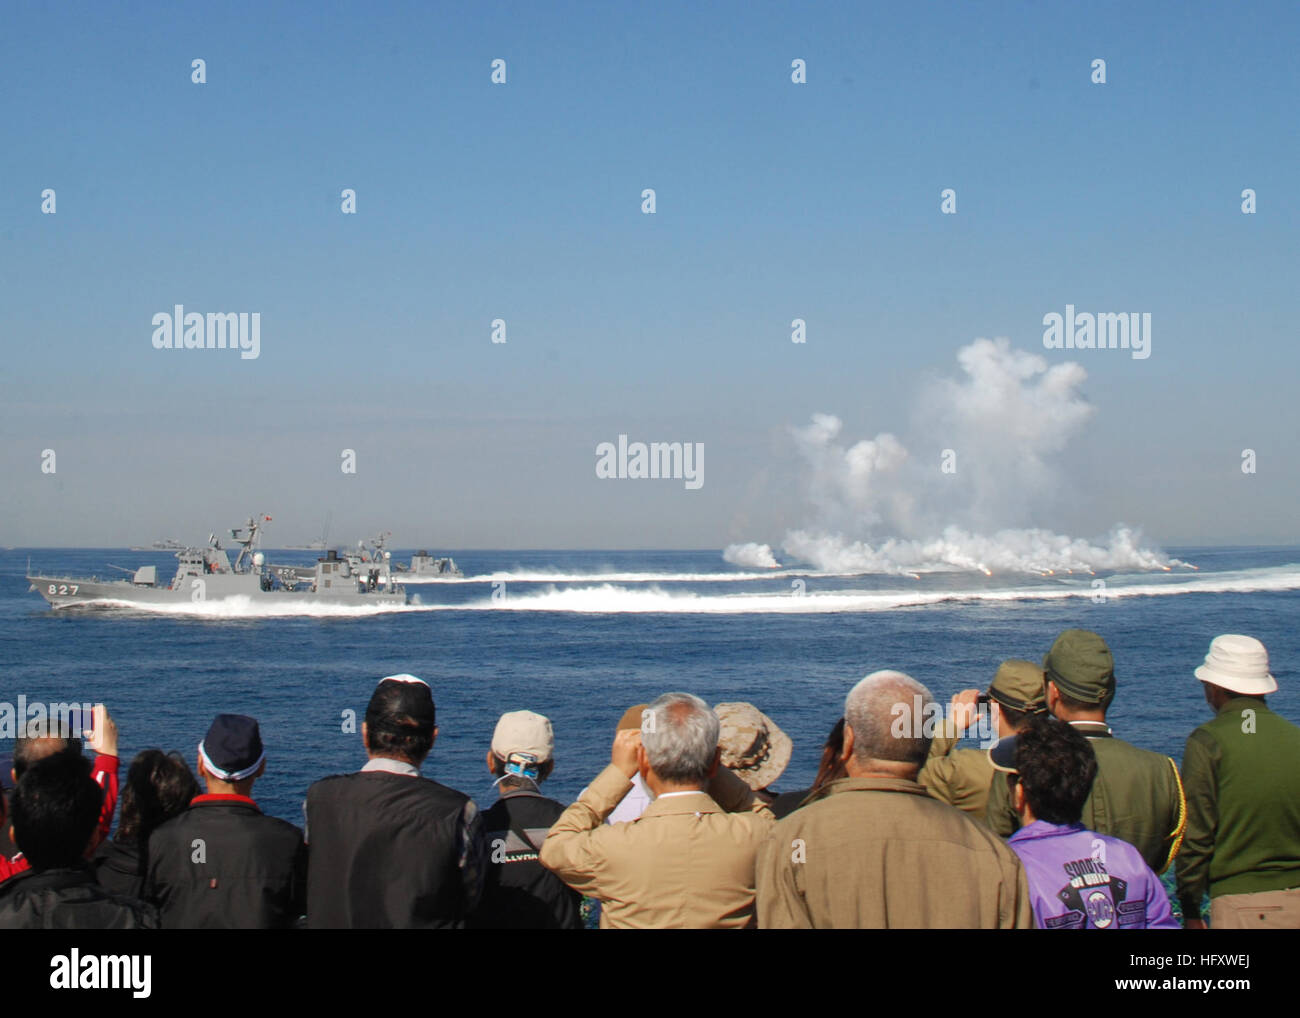 091021-N-3283P-410 SAGAMI BAY, Japan (Oct. 21, 2009) Spectators watch as the Japan Maritime Self-Defense Force missile boats JS Kumataka (PG 827) and JS Ootaka (PG 826) perform high-speed maneuvering runs during a rehearsal for the 2009 fleet review. More than 8,000 civilians toured selected ships and viewed the rehearsal. (U.S. Navy photo by Mass Communication Specialist Seaman Dominique Pineiro/Released) US Navy 091021-N-3283P-410 Spectators watch as the Japan Maritime Self-Defense Force missile boats JS Kumataka (PG 827) and JS Ootaka (PG 826) perform high-speed maneuvering runs during a re Stock Photo